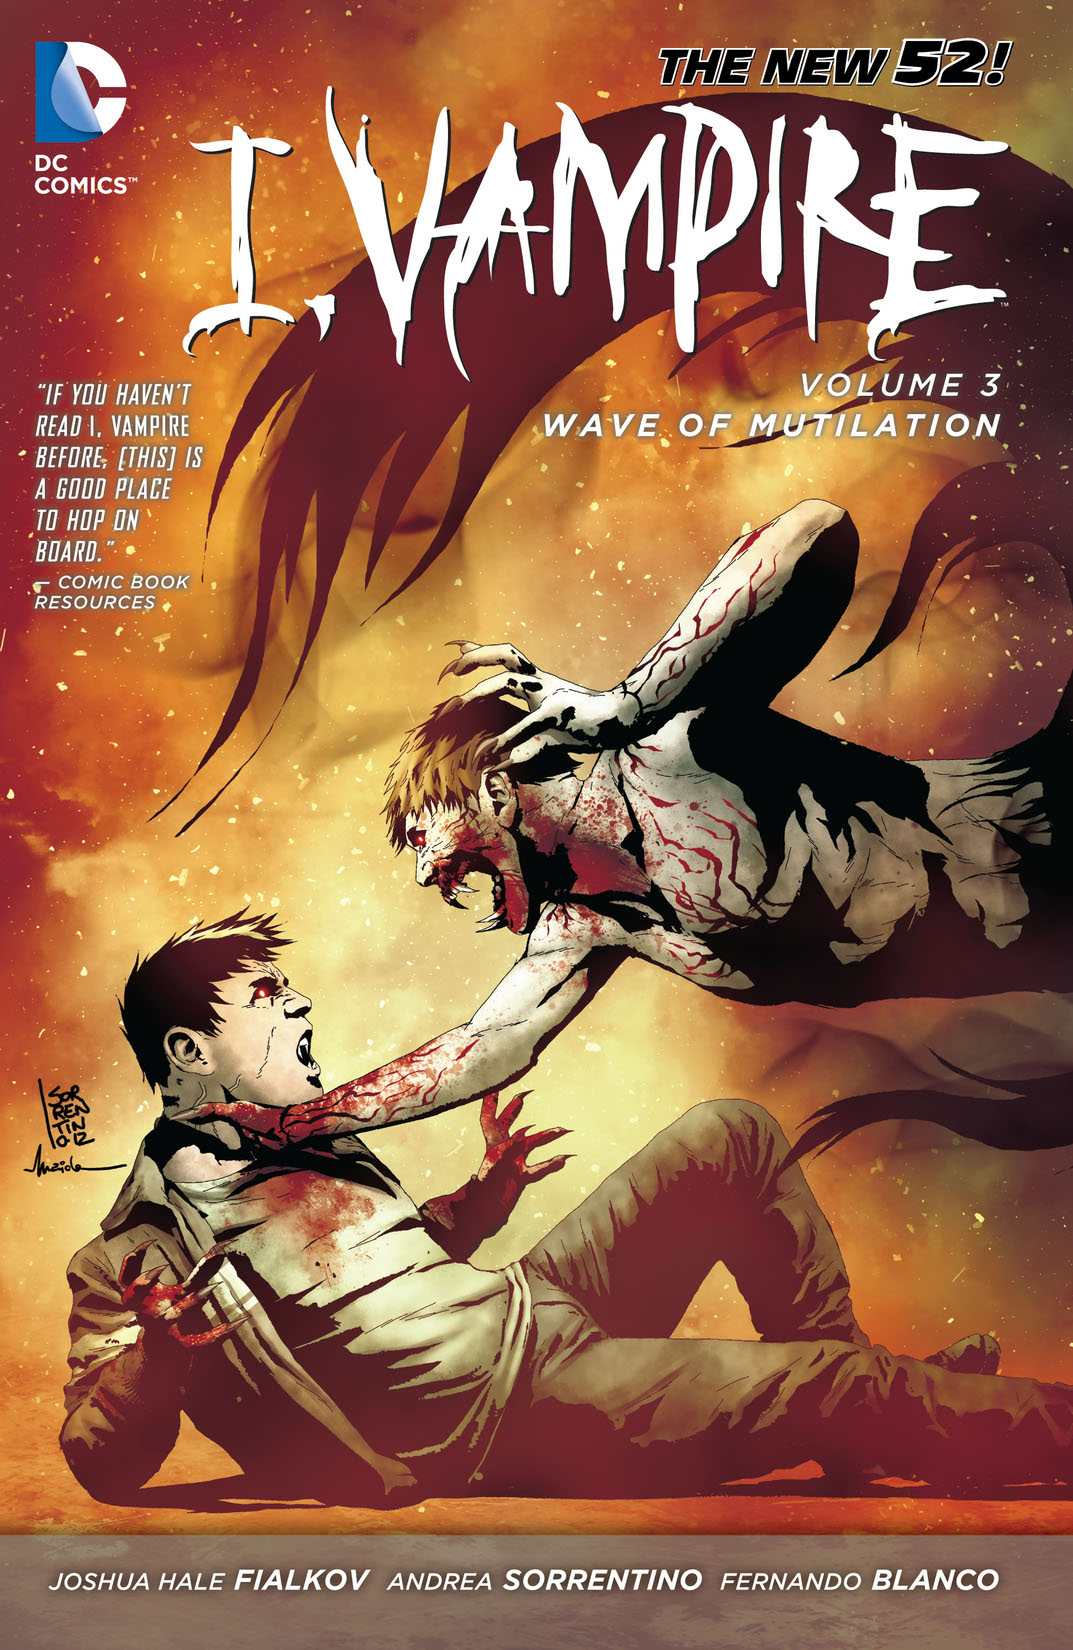 I, Vampire Vol. 3: Wave of Mutilation preview images